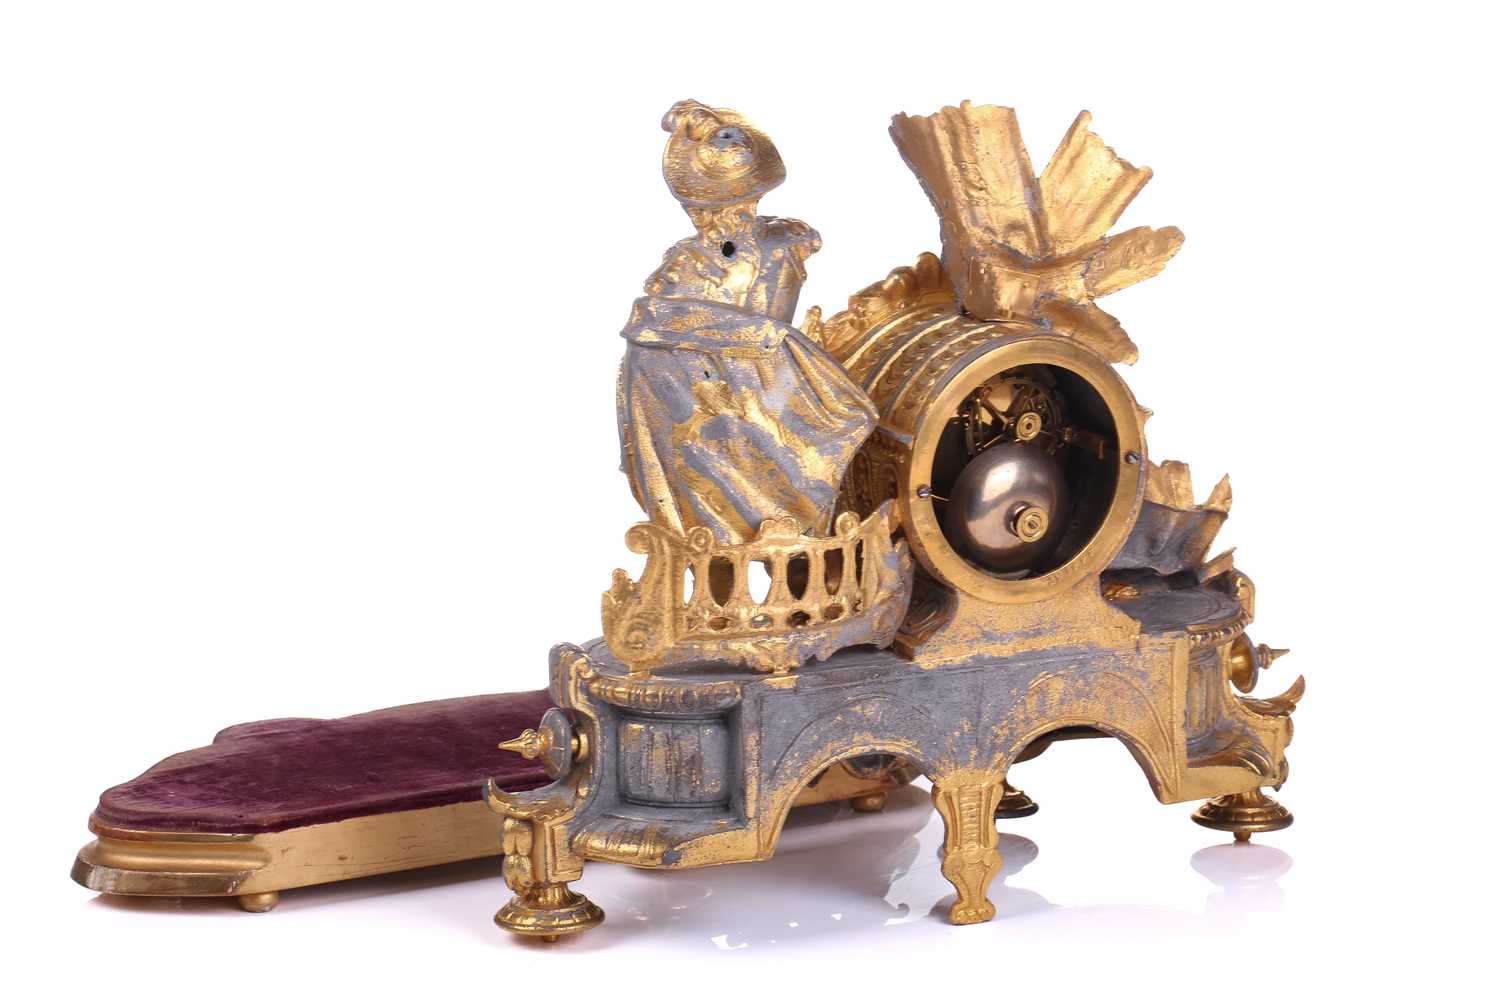 A late 19th century French parcel gilt spelter clock, depicting a nobleman standing beside a drum - Image 8 of 14